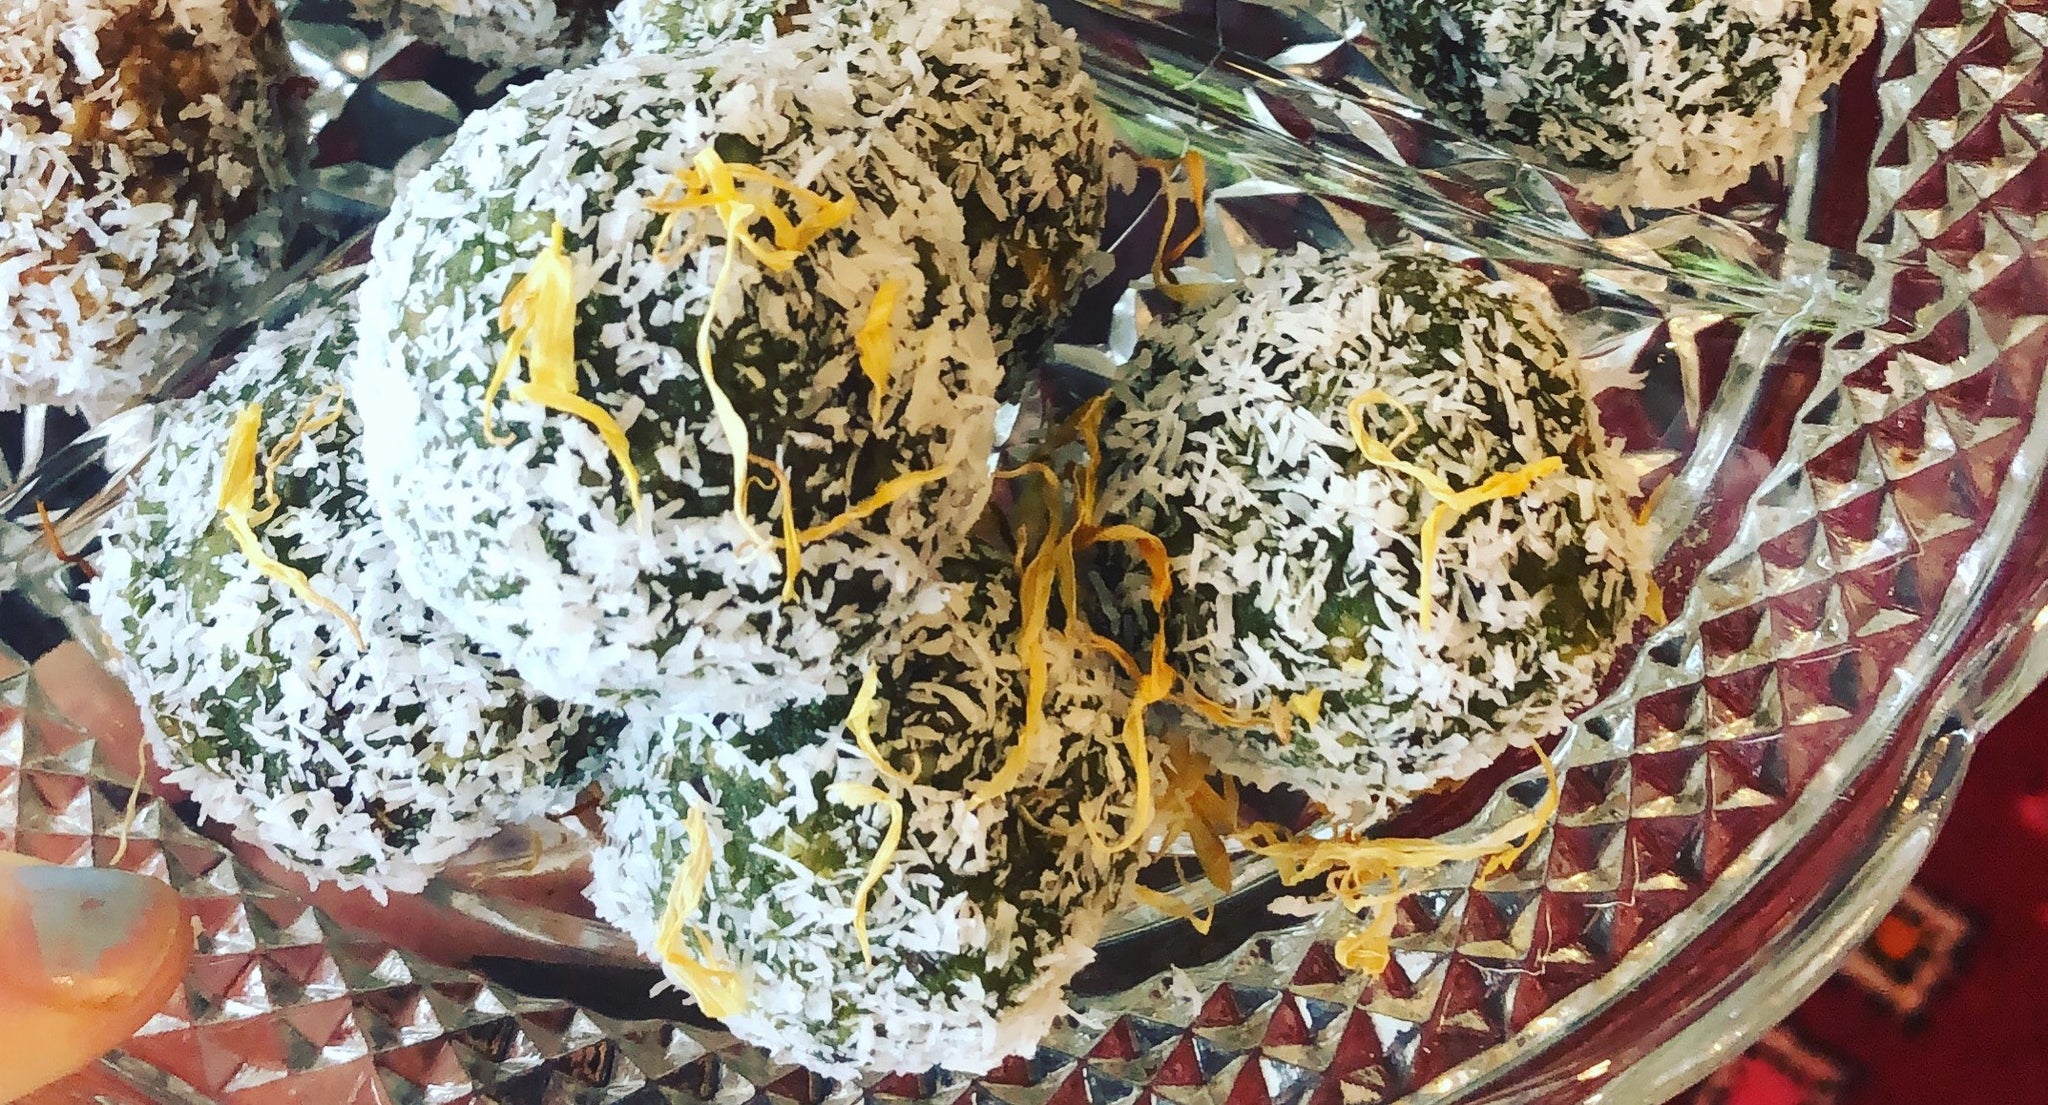 Keto diet approved paleo holiday bliss balls made with organic matcha green tea